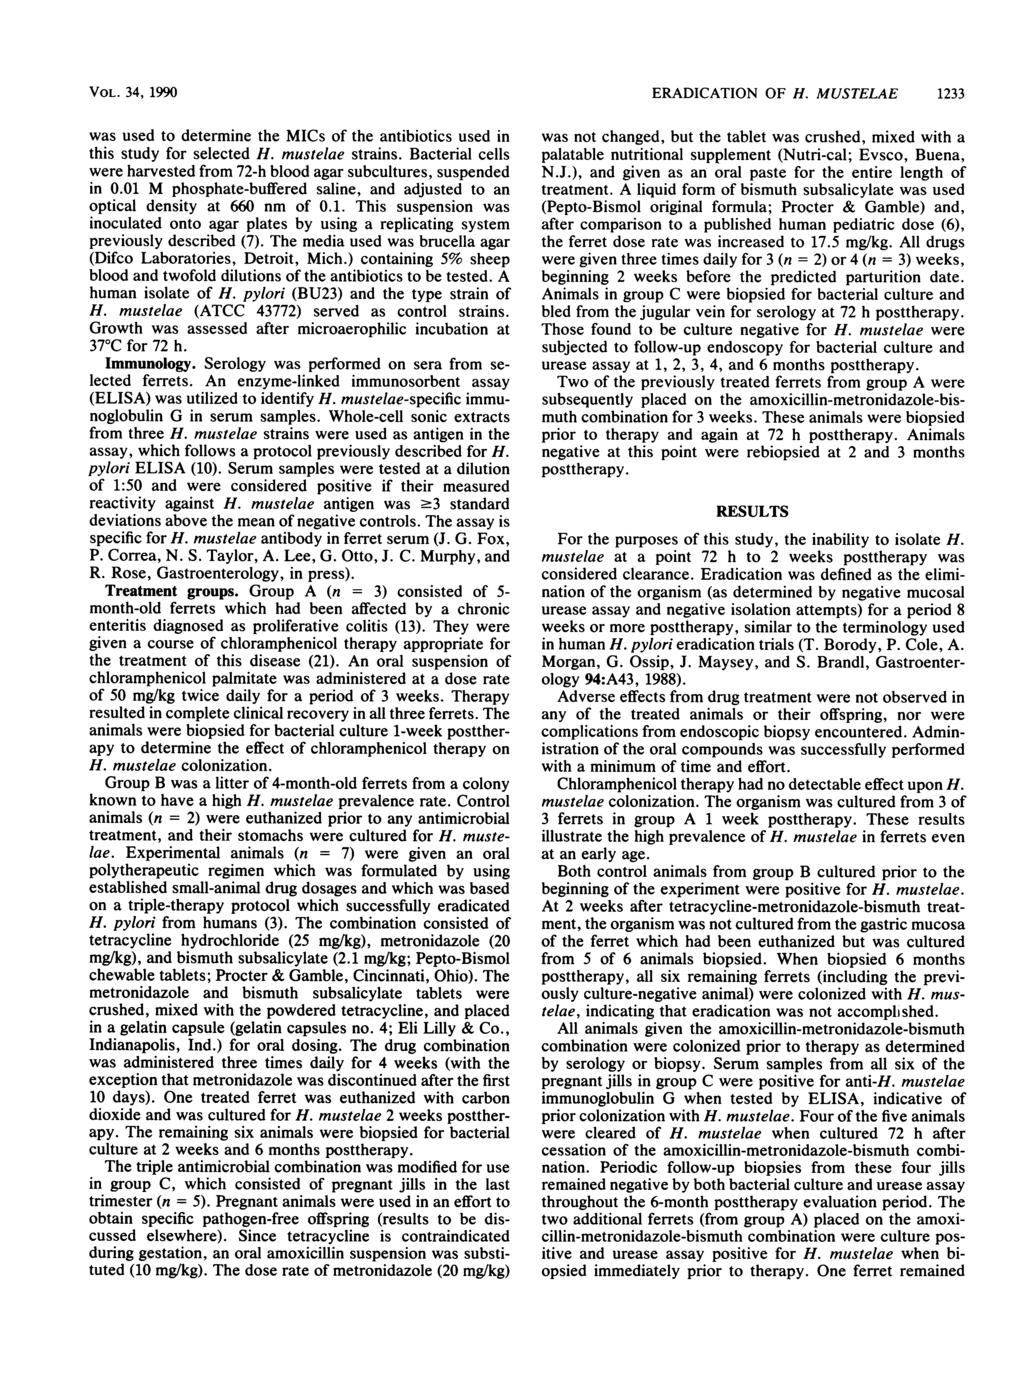 VOL. 34, 1990 was used to determine the MICs of the antibiotics used in this study for selected H. mustelae strains. Bacterial cells were harvested from 72-h blood agar subcultures, suspended in 0.